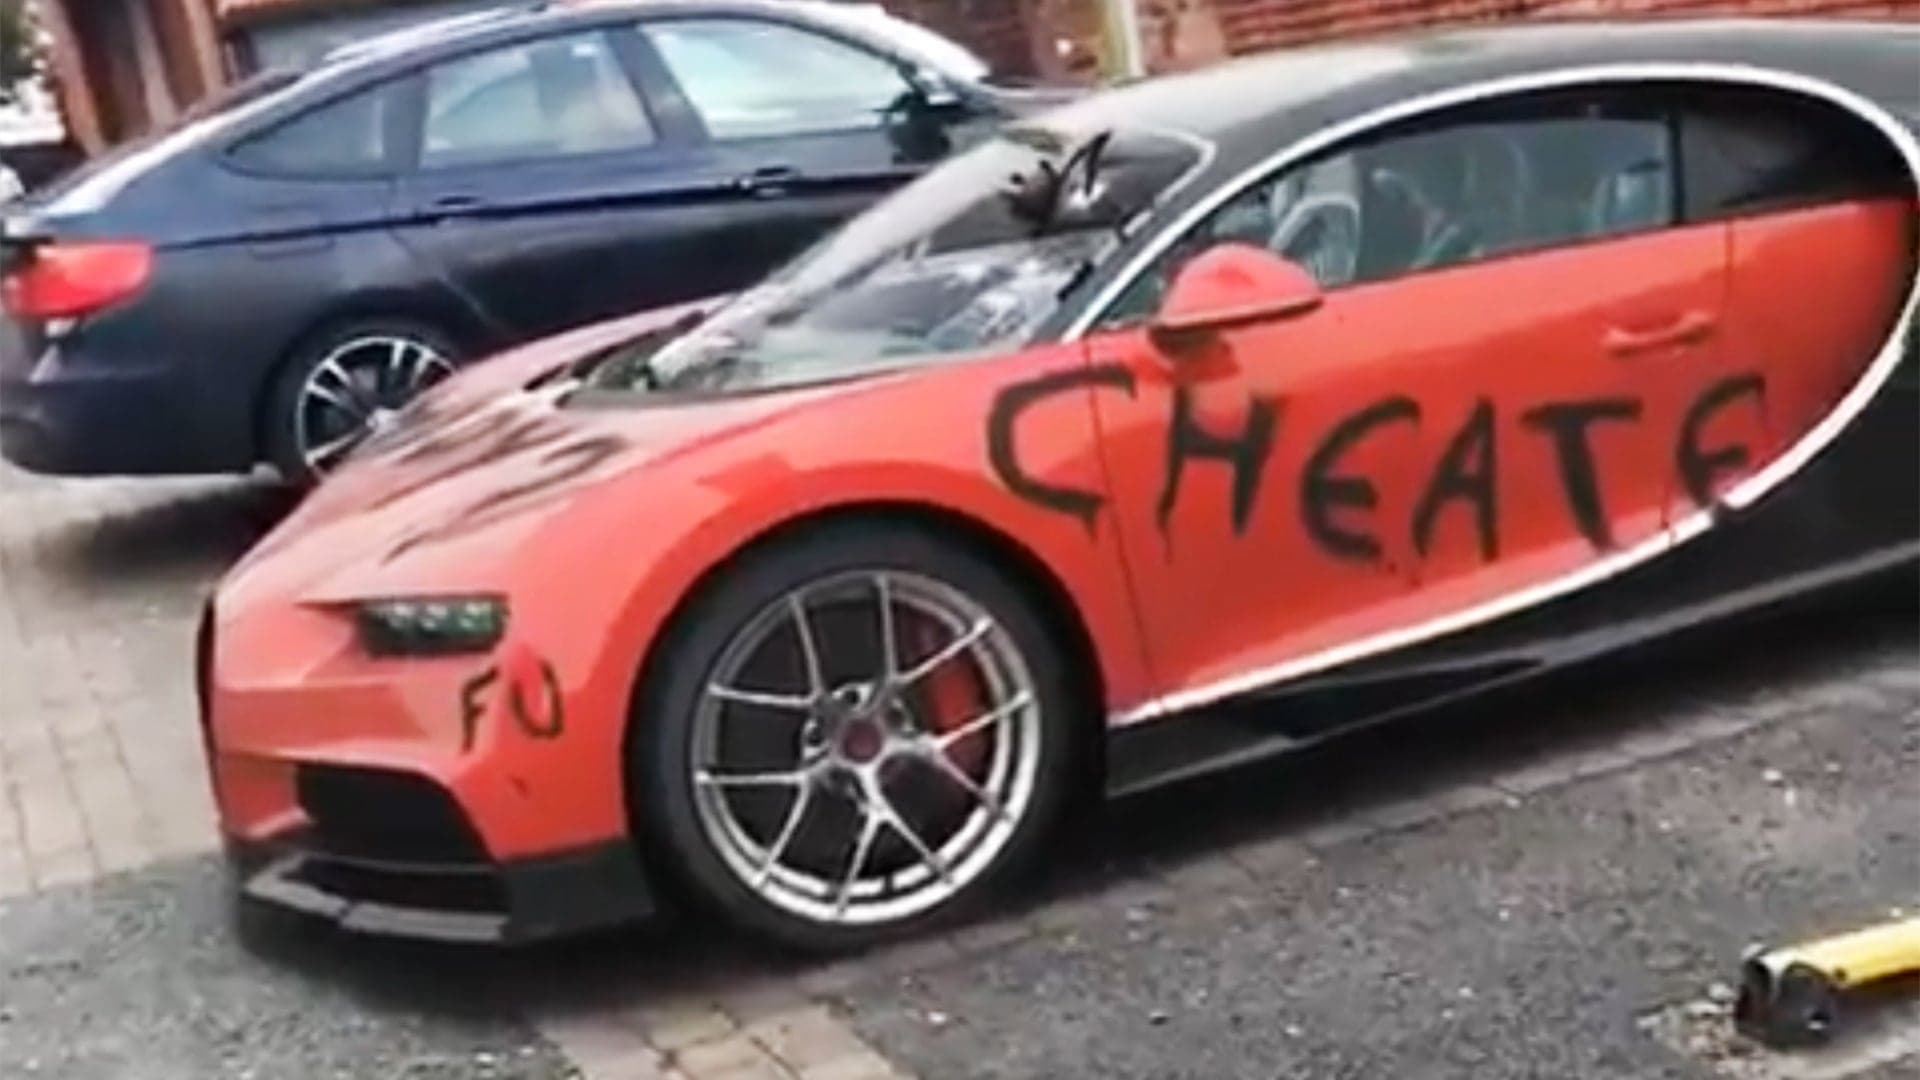 This Video of a $3M Bugatti Chiron Destroyed by a Scorned Woman Is a Complete Fake